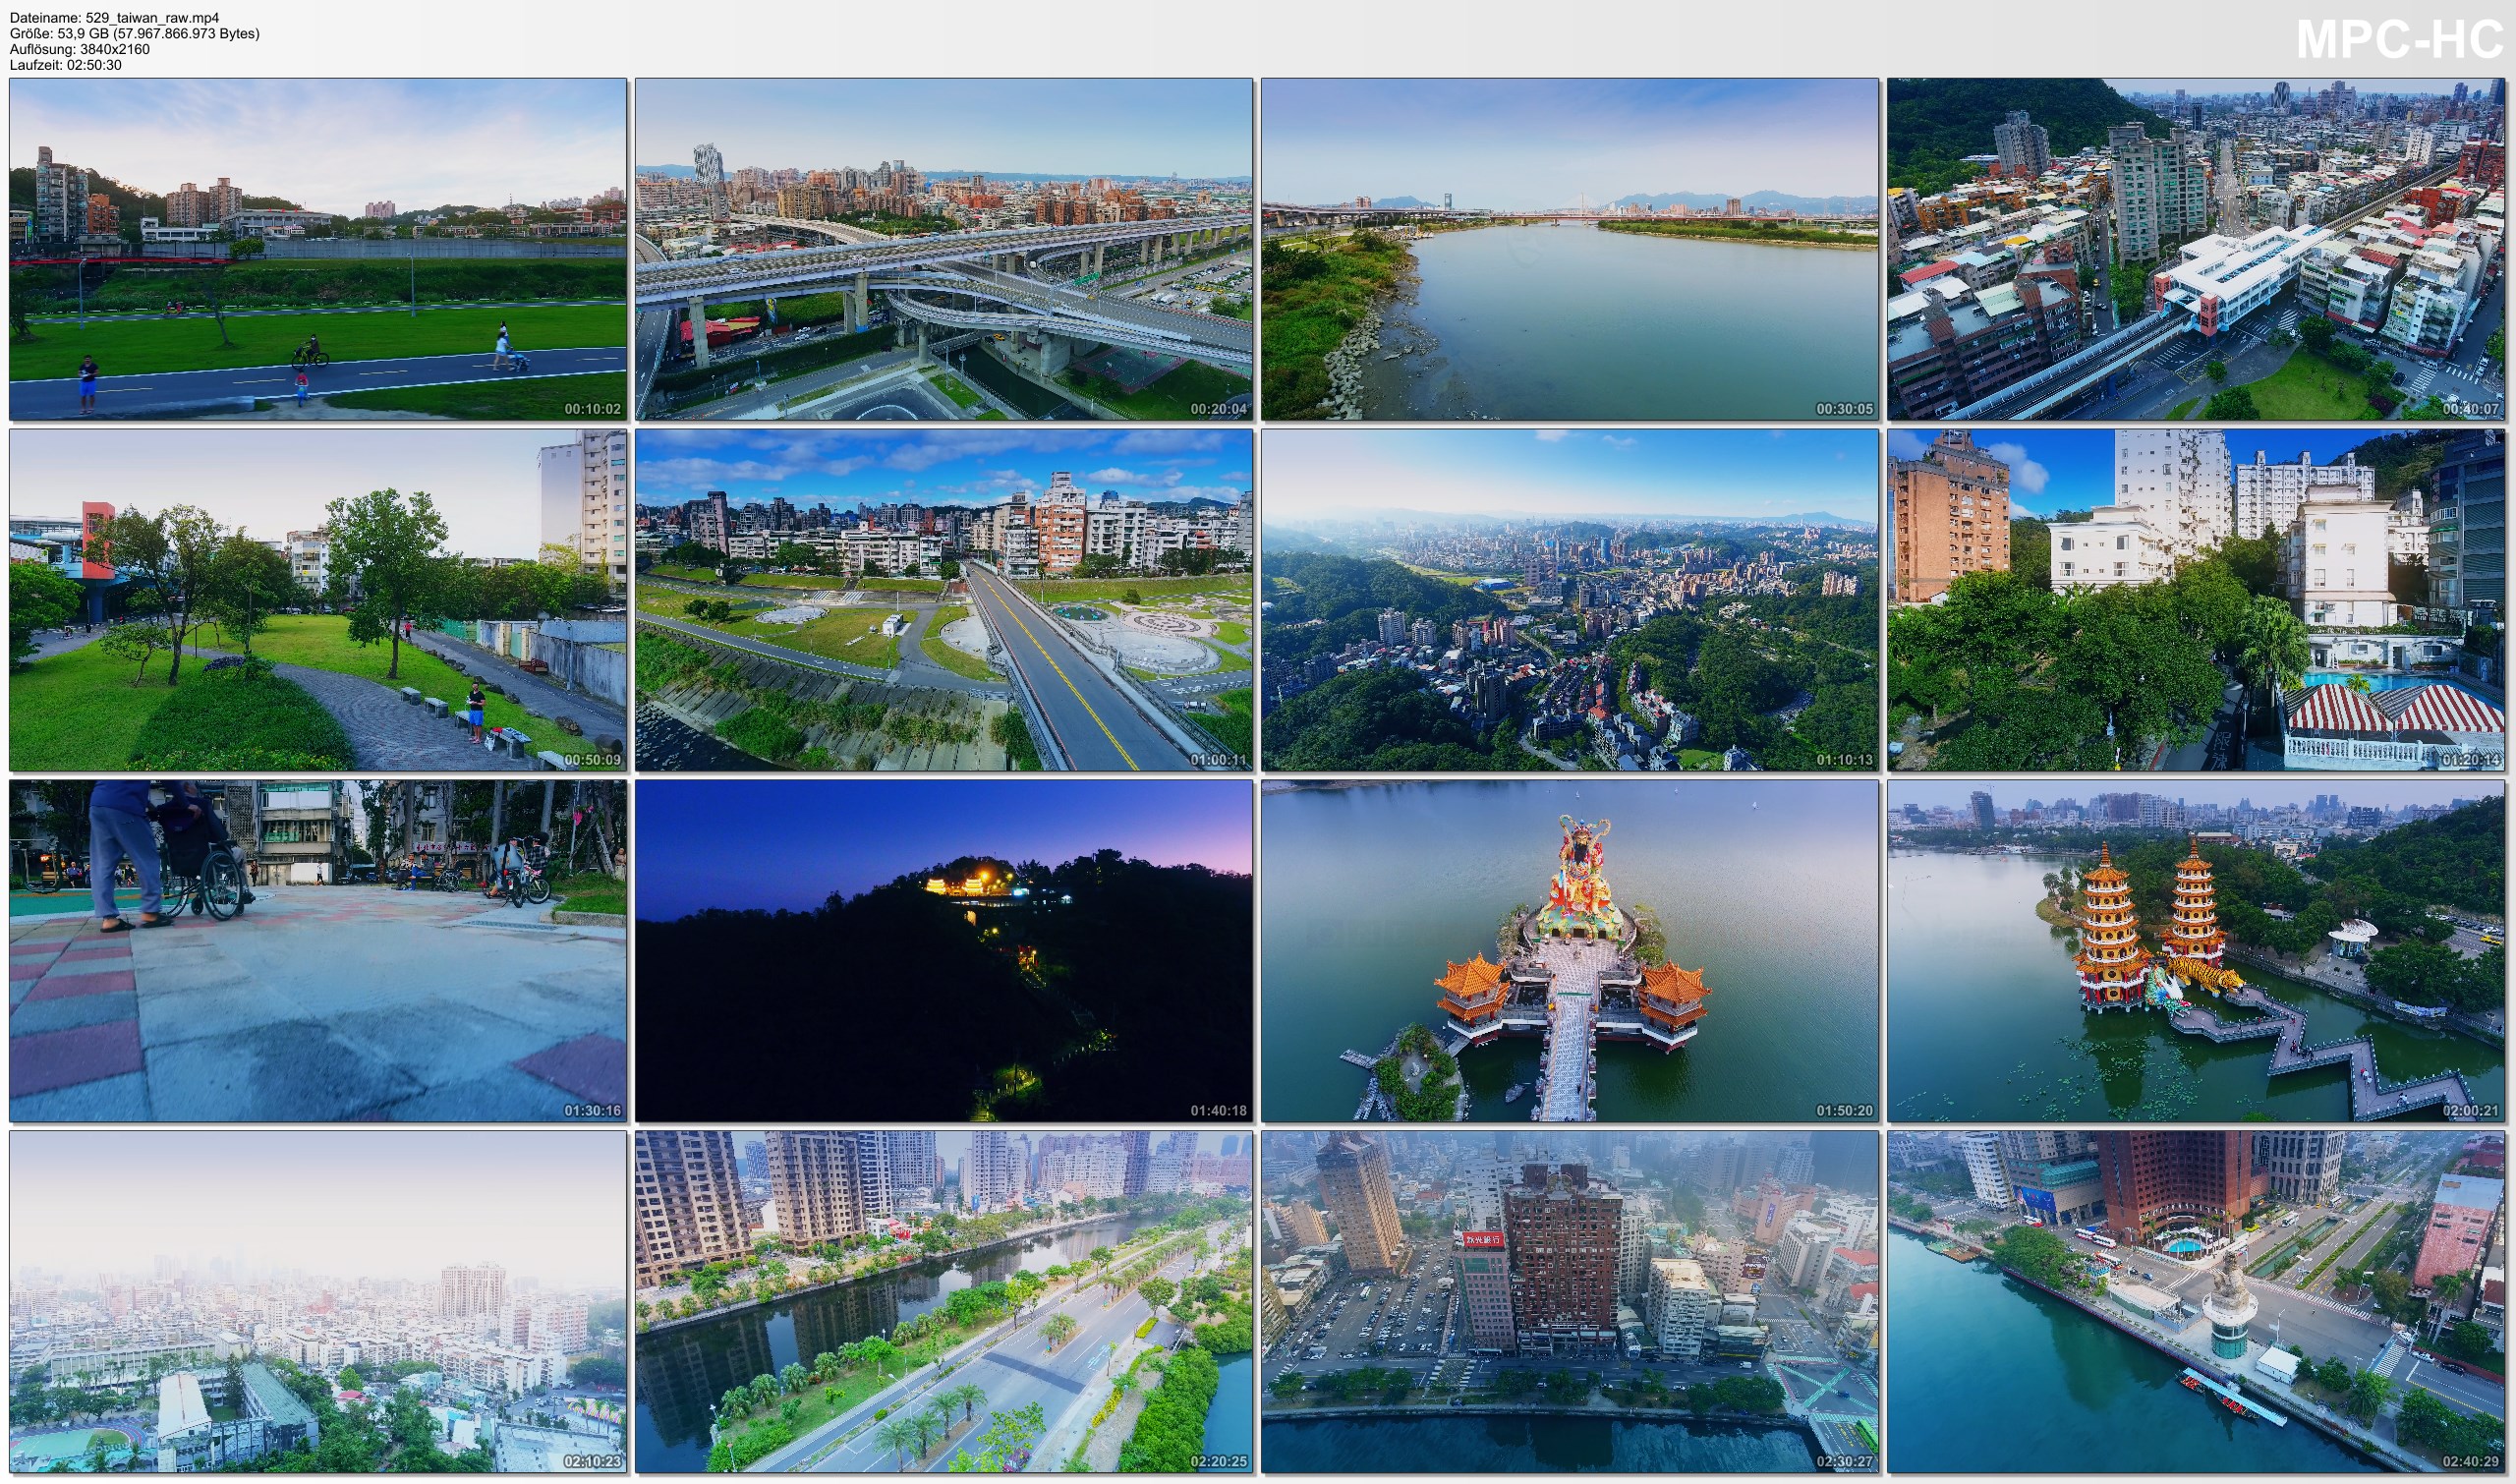 Drone Pictures from Video 【4K】Drone RAW Footage | This is TAIWAN 2020 | Capital City Taipei | Kaohsiung | UltraHD Stock Video